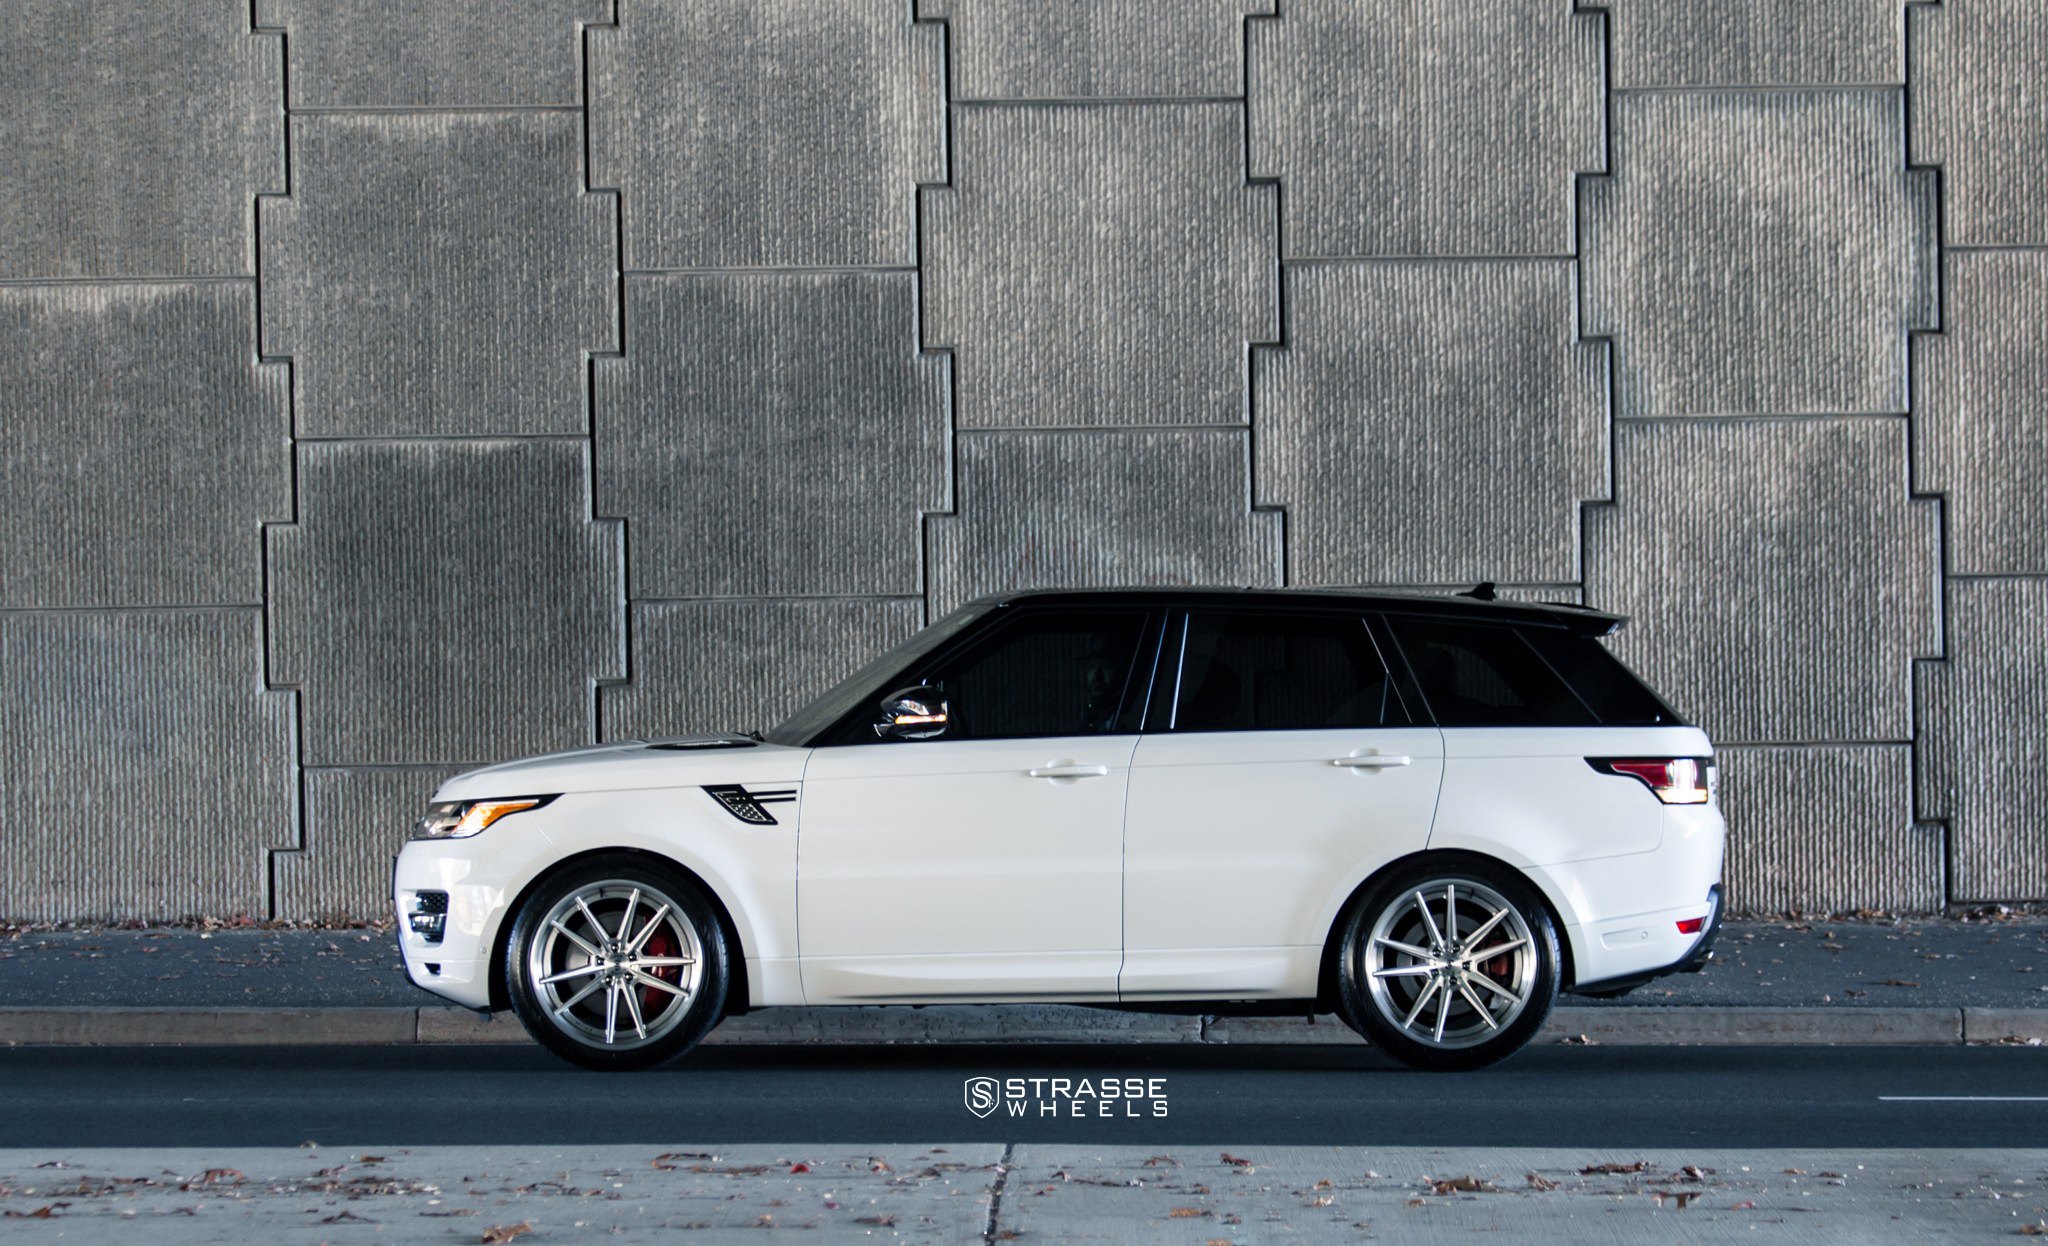 White Range Rover Sport with Brushed Aluminum Strasse Rims - Photo by Strasse Forged